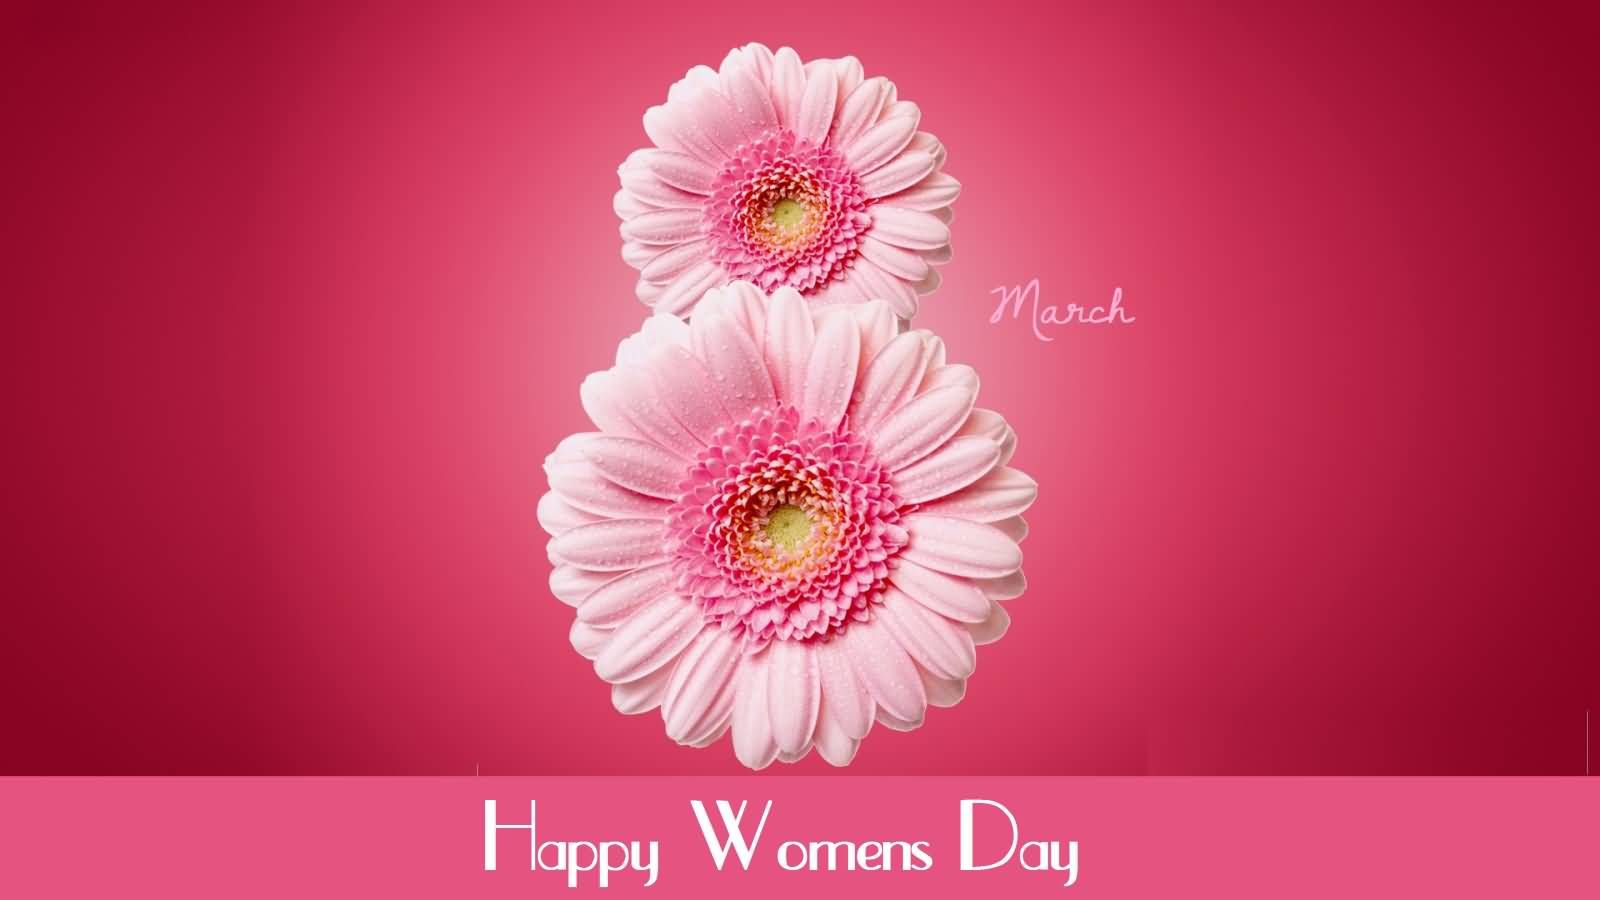 8 March Happy Womens Day Beautiful Card